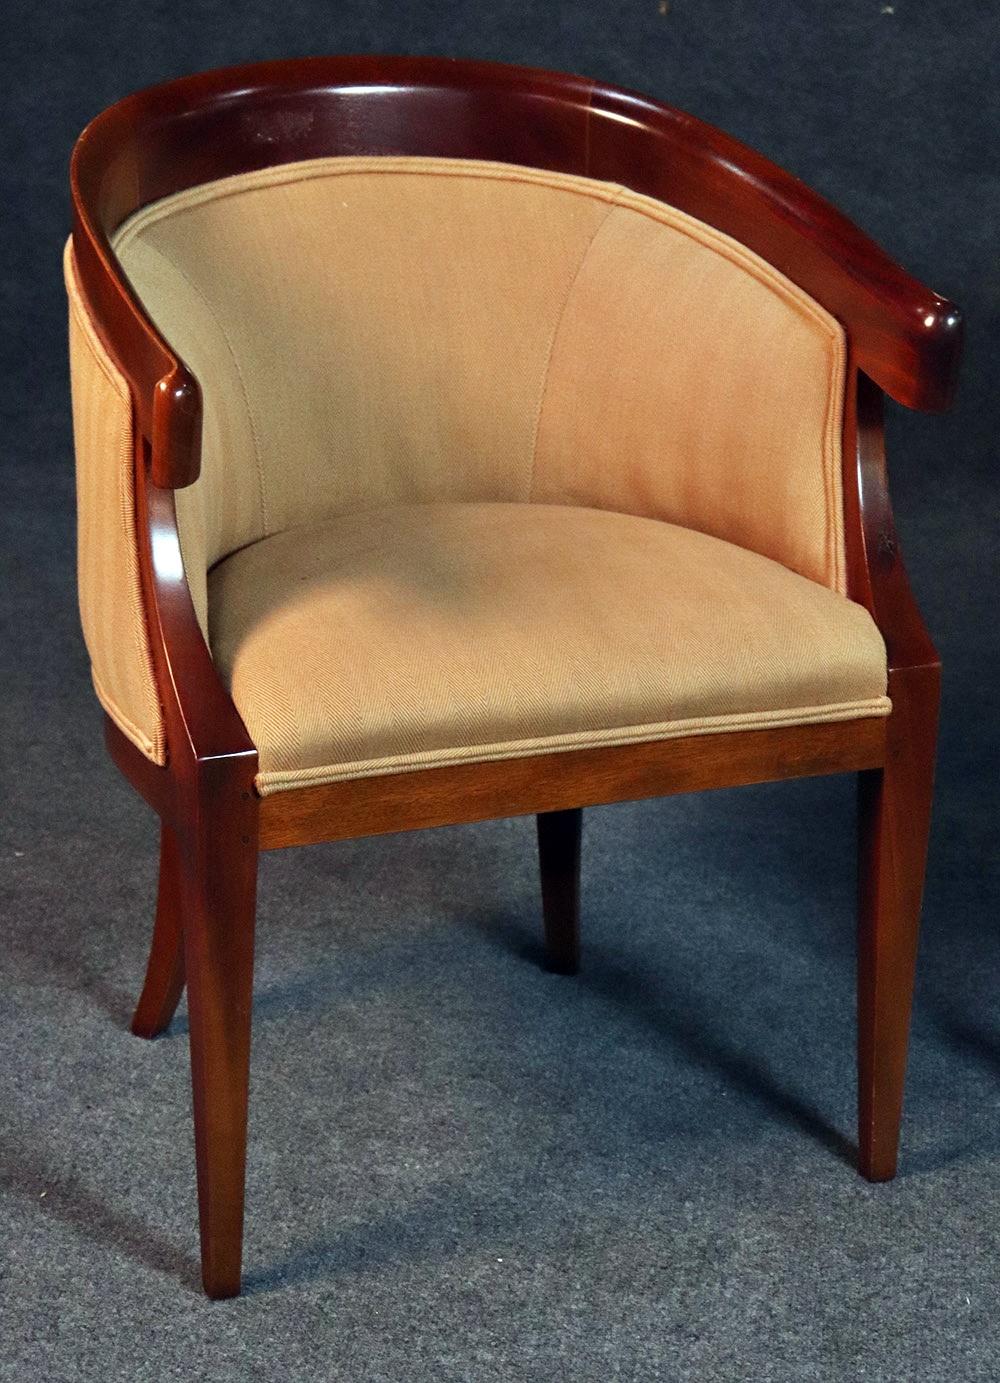 Pair of Mid-Century Modern Regency style walnut club chairs with bow tie dovetailed backs and herringbone upholstery.